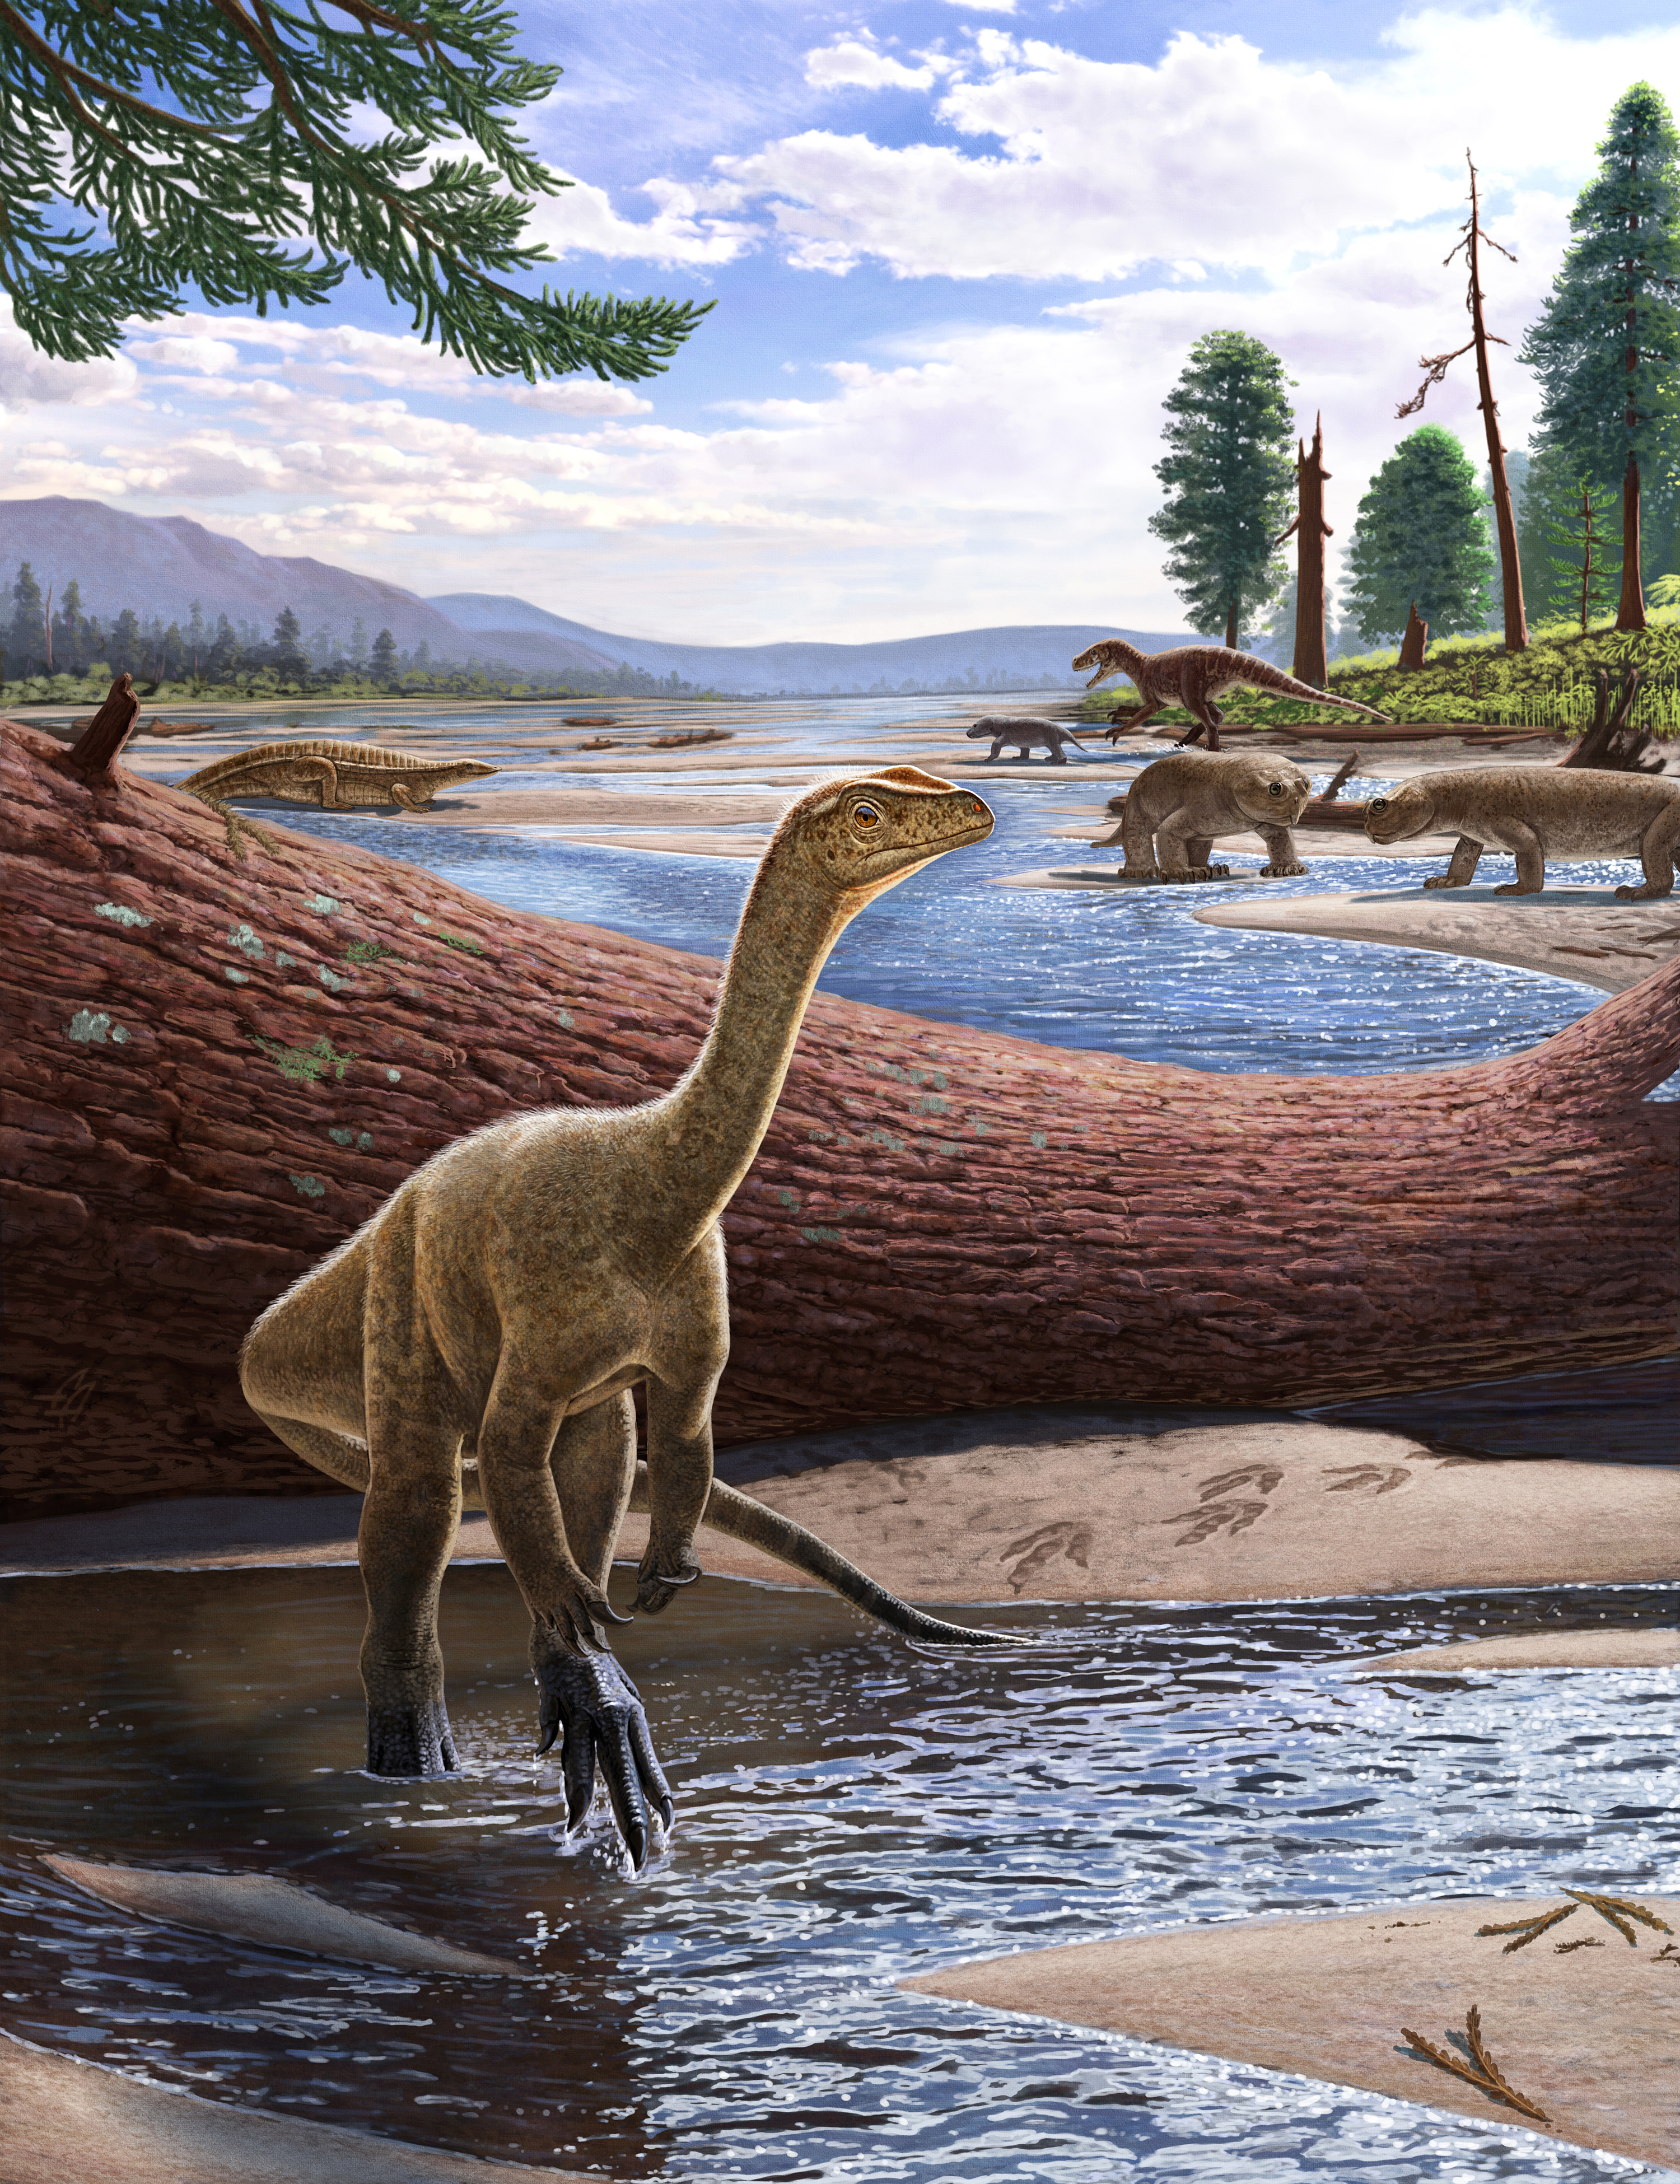 Virginia Tech and Zimbabwean paleontology teams lead discovery and naming  of Africa's oldest known dinosaur | VTx | Virginia Tech